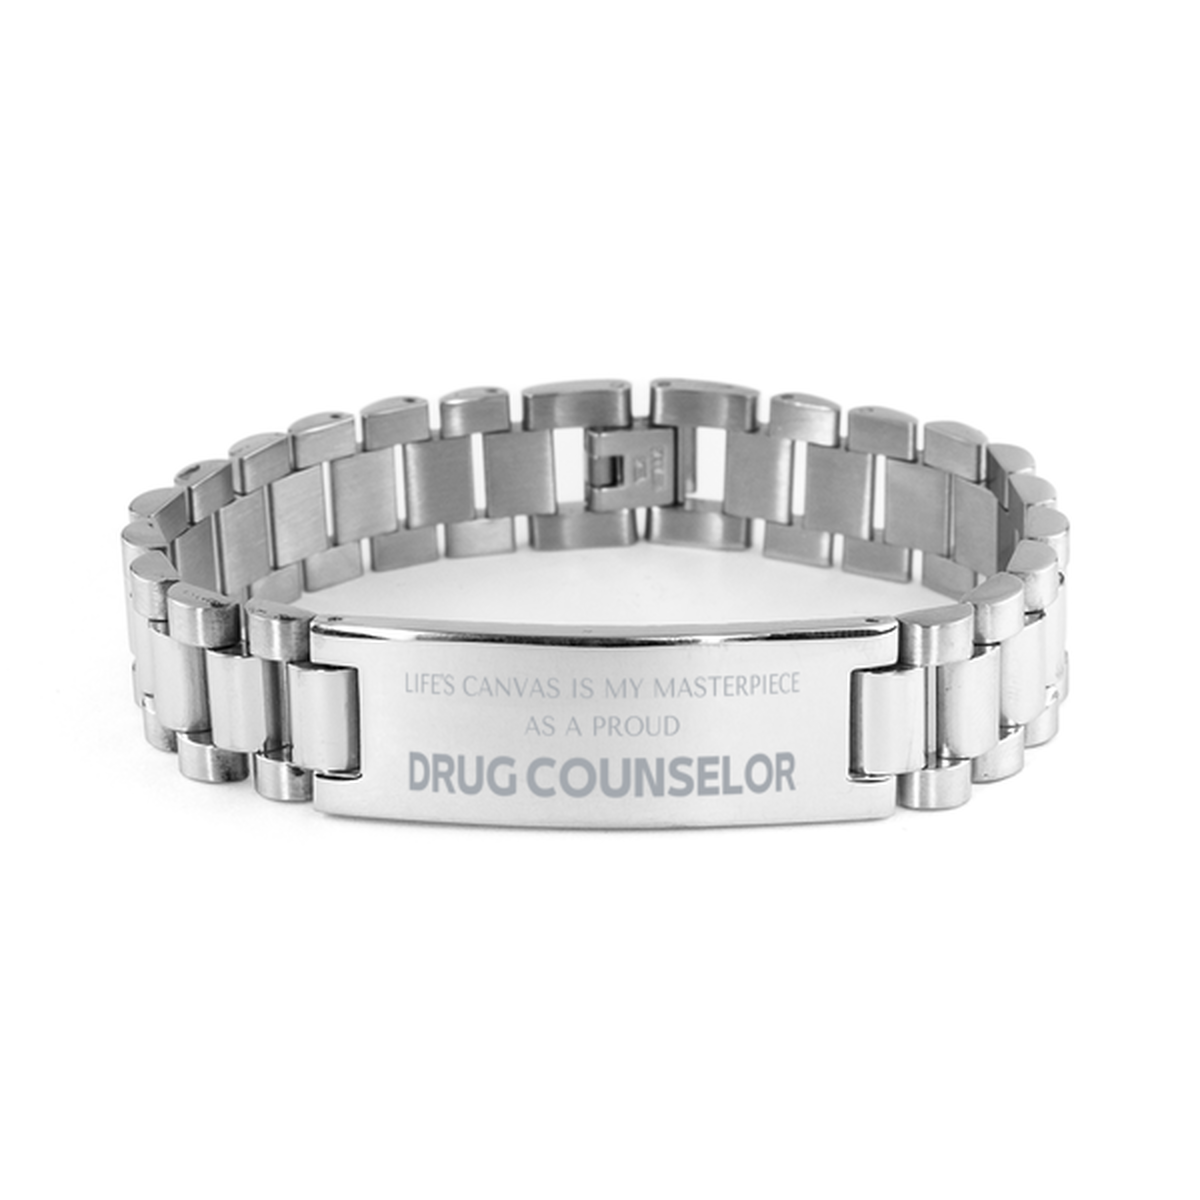 Proud Drug Counselor Gifts, Life's canvas is my masterpiece, Epic Birthday Christmas Unique Ladder Stainless Steel Bracelet For Drug Counselor, Coworkers, Men, Women, Friends